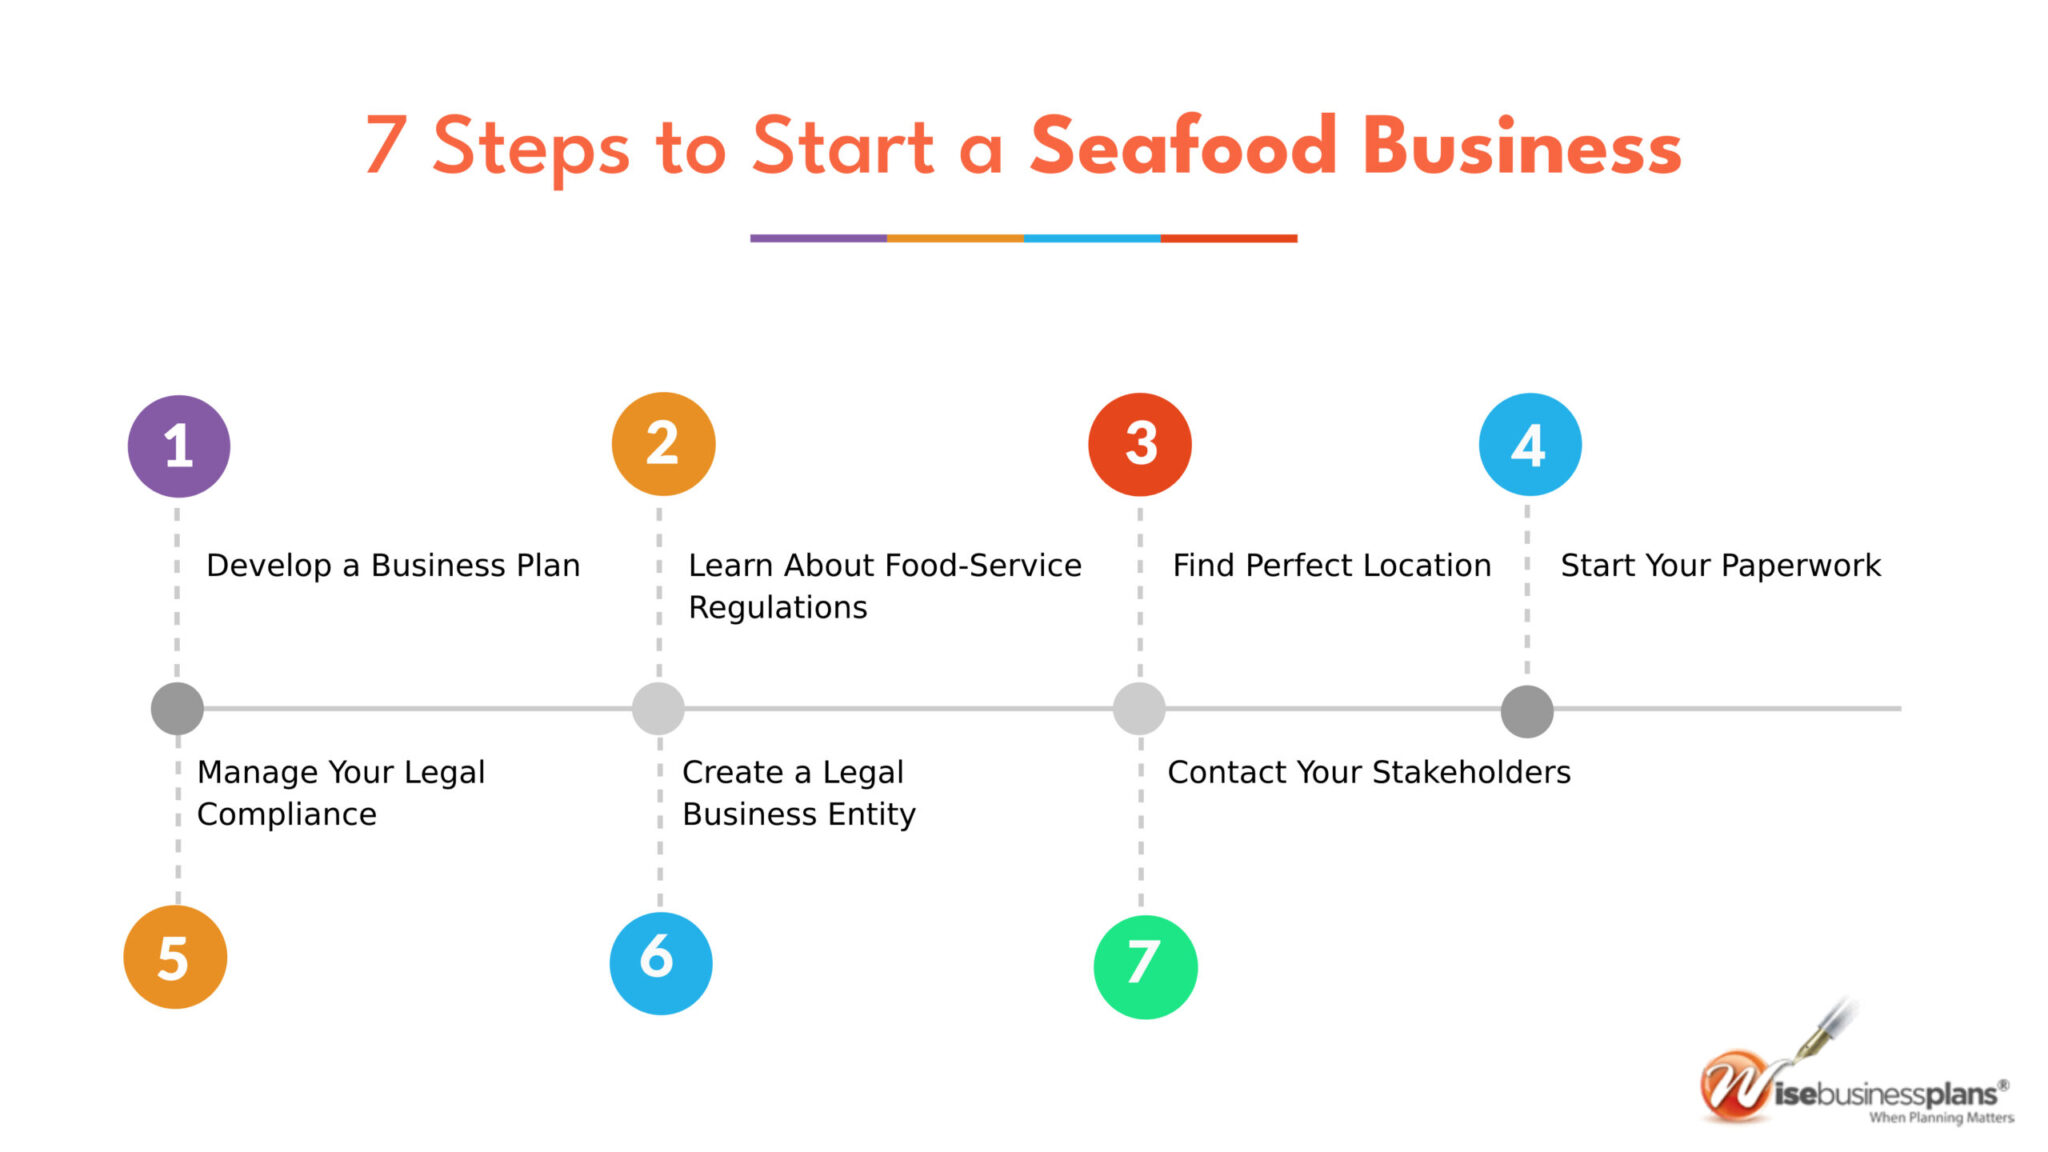 Steps to start a seafood business